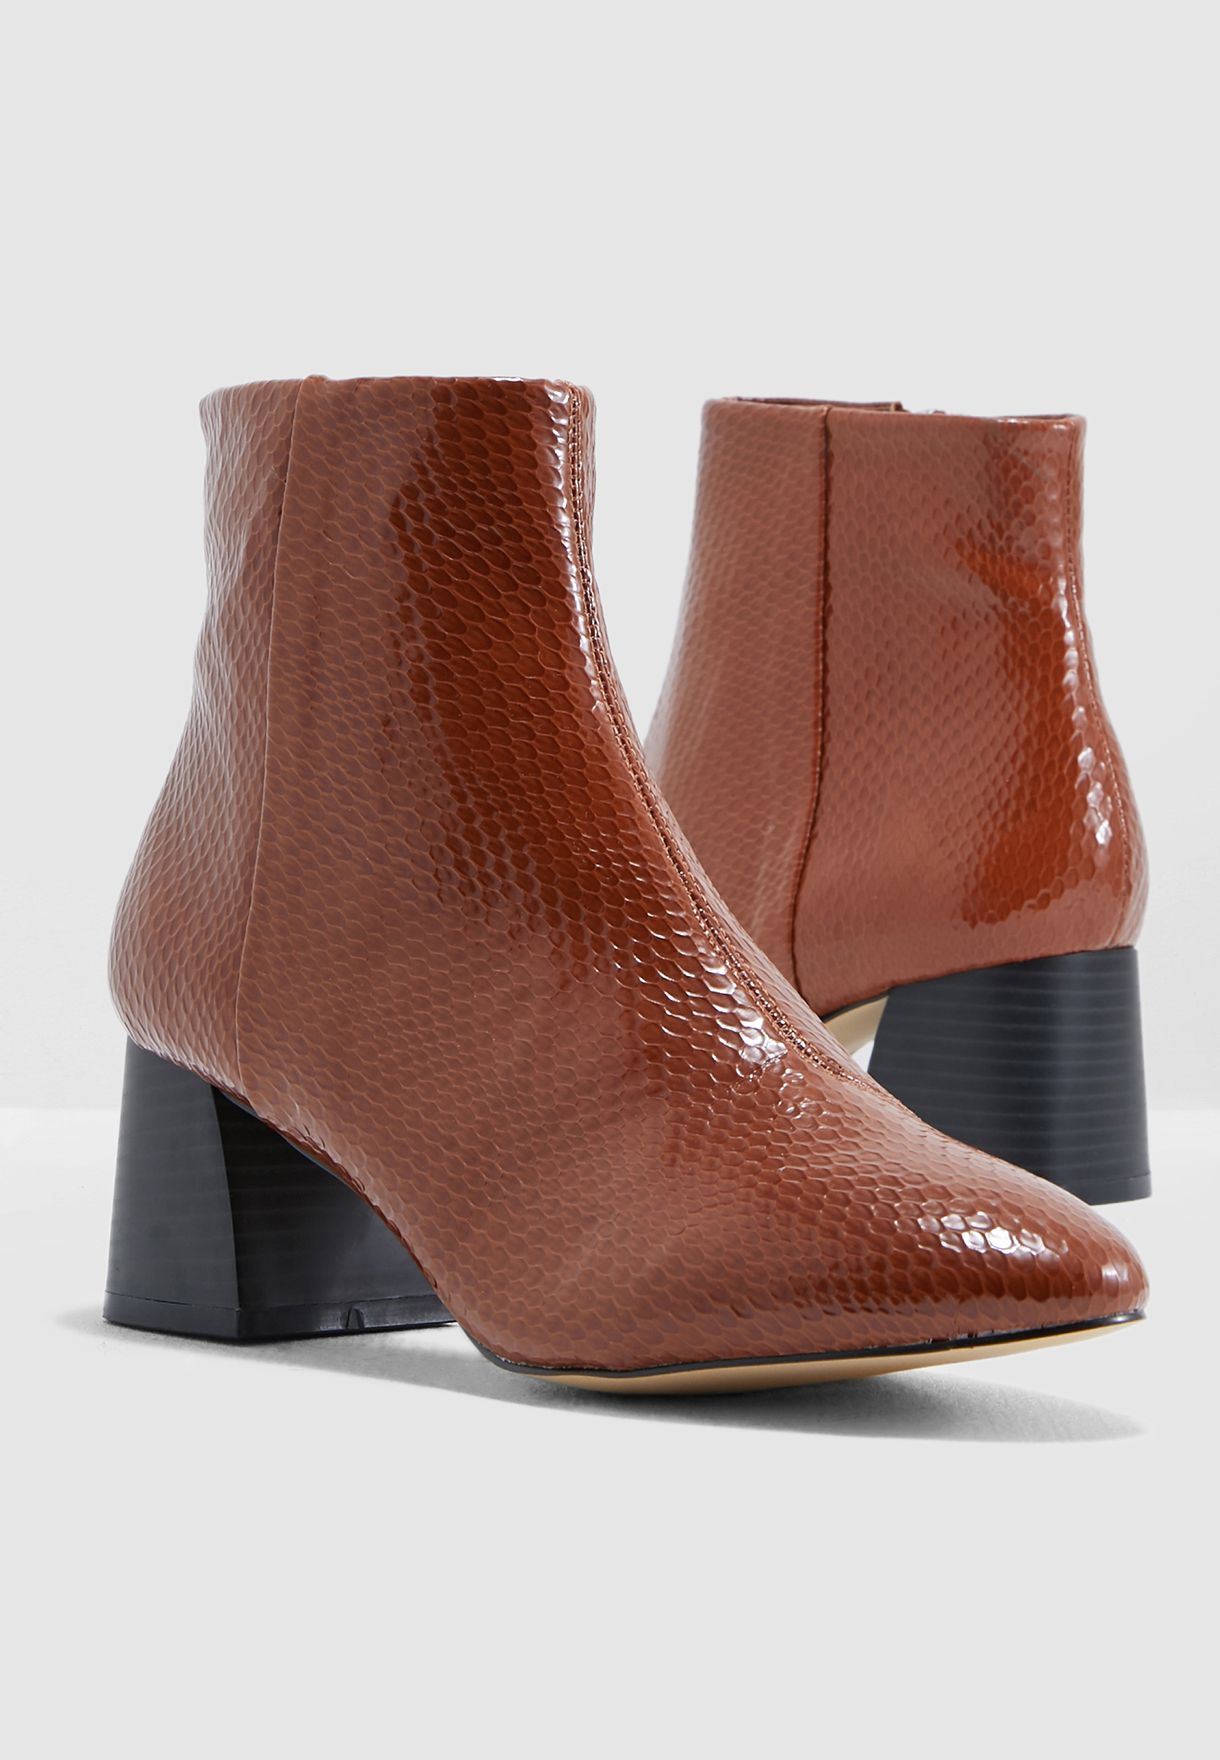 topshop womens ankle boots